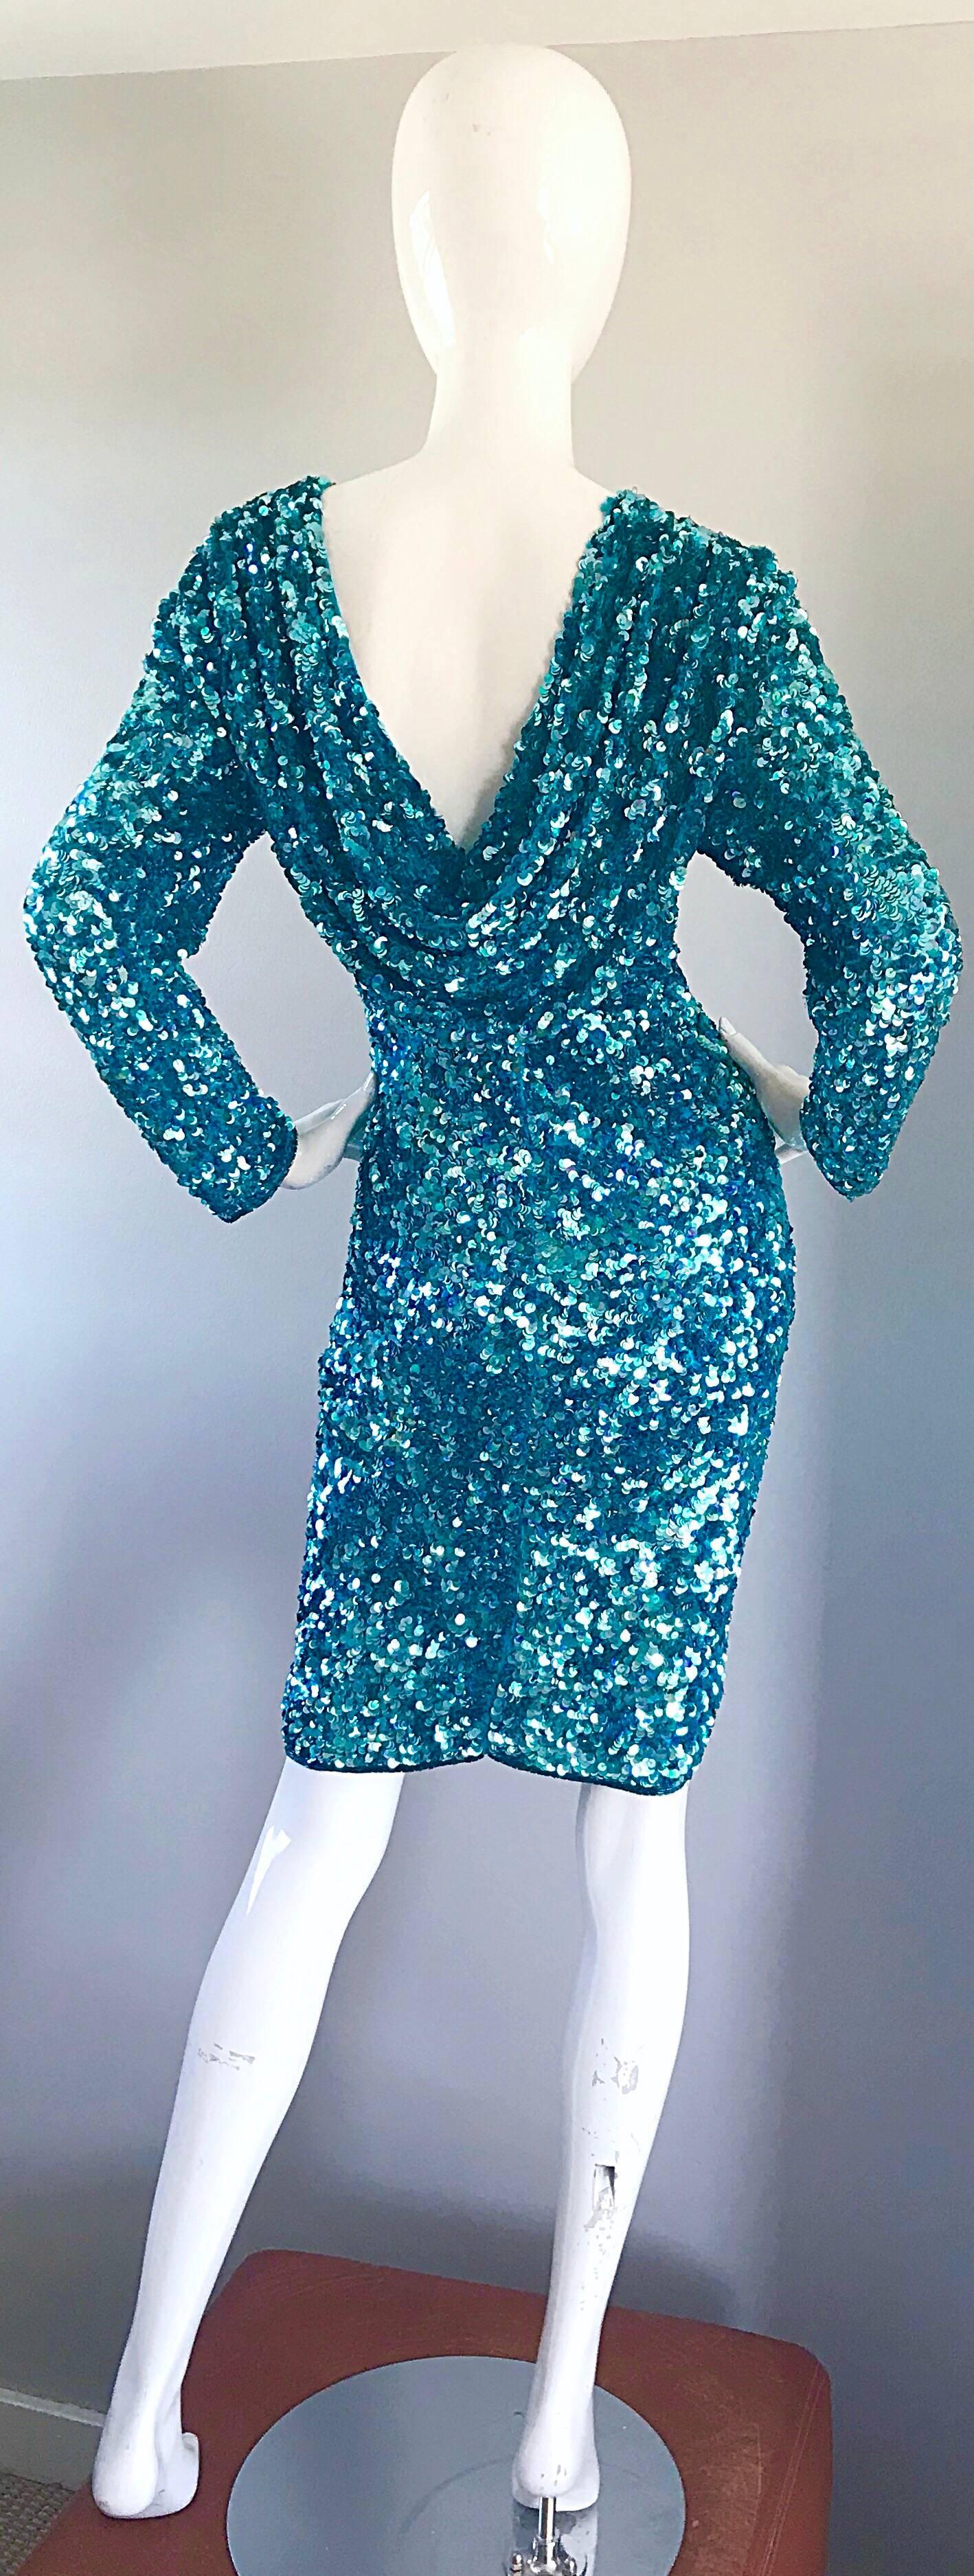 Gorgeous vintage larger size early 1990s turquoise blue fully sequined long sleeve silk chiffon dress! Features thousands of hand-sewn sequins throughout. Flattering lower cut back features and elegant drape. Turquoise blue seed beads line the neck